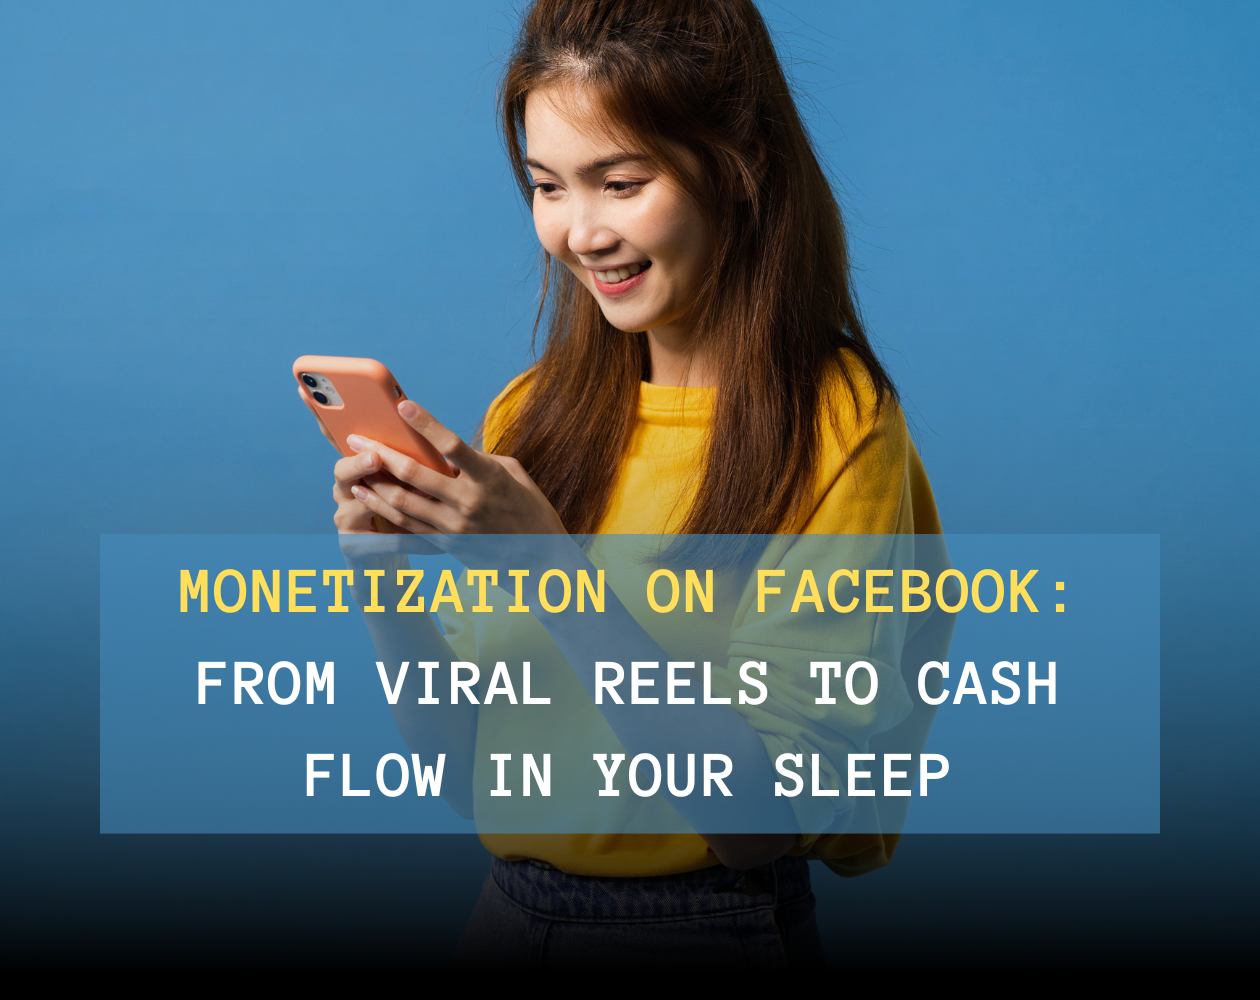 Monetization on Facebook: From Viral Reels to Cash Flow in Your Sleep